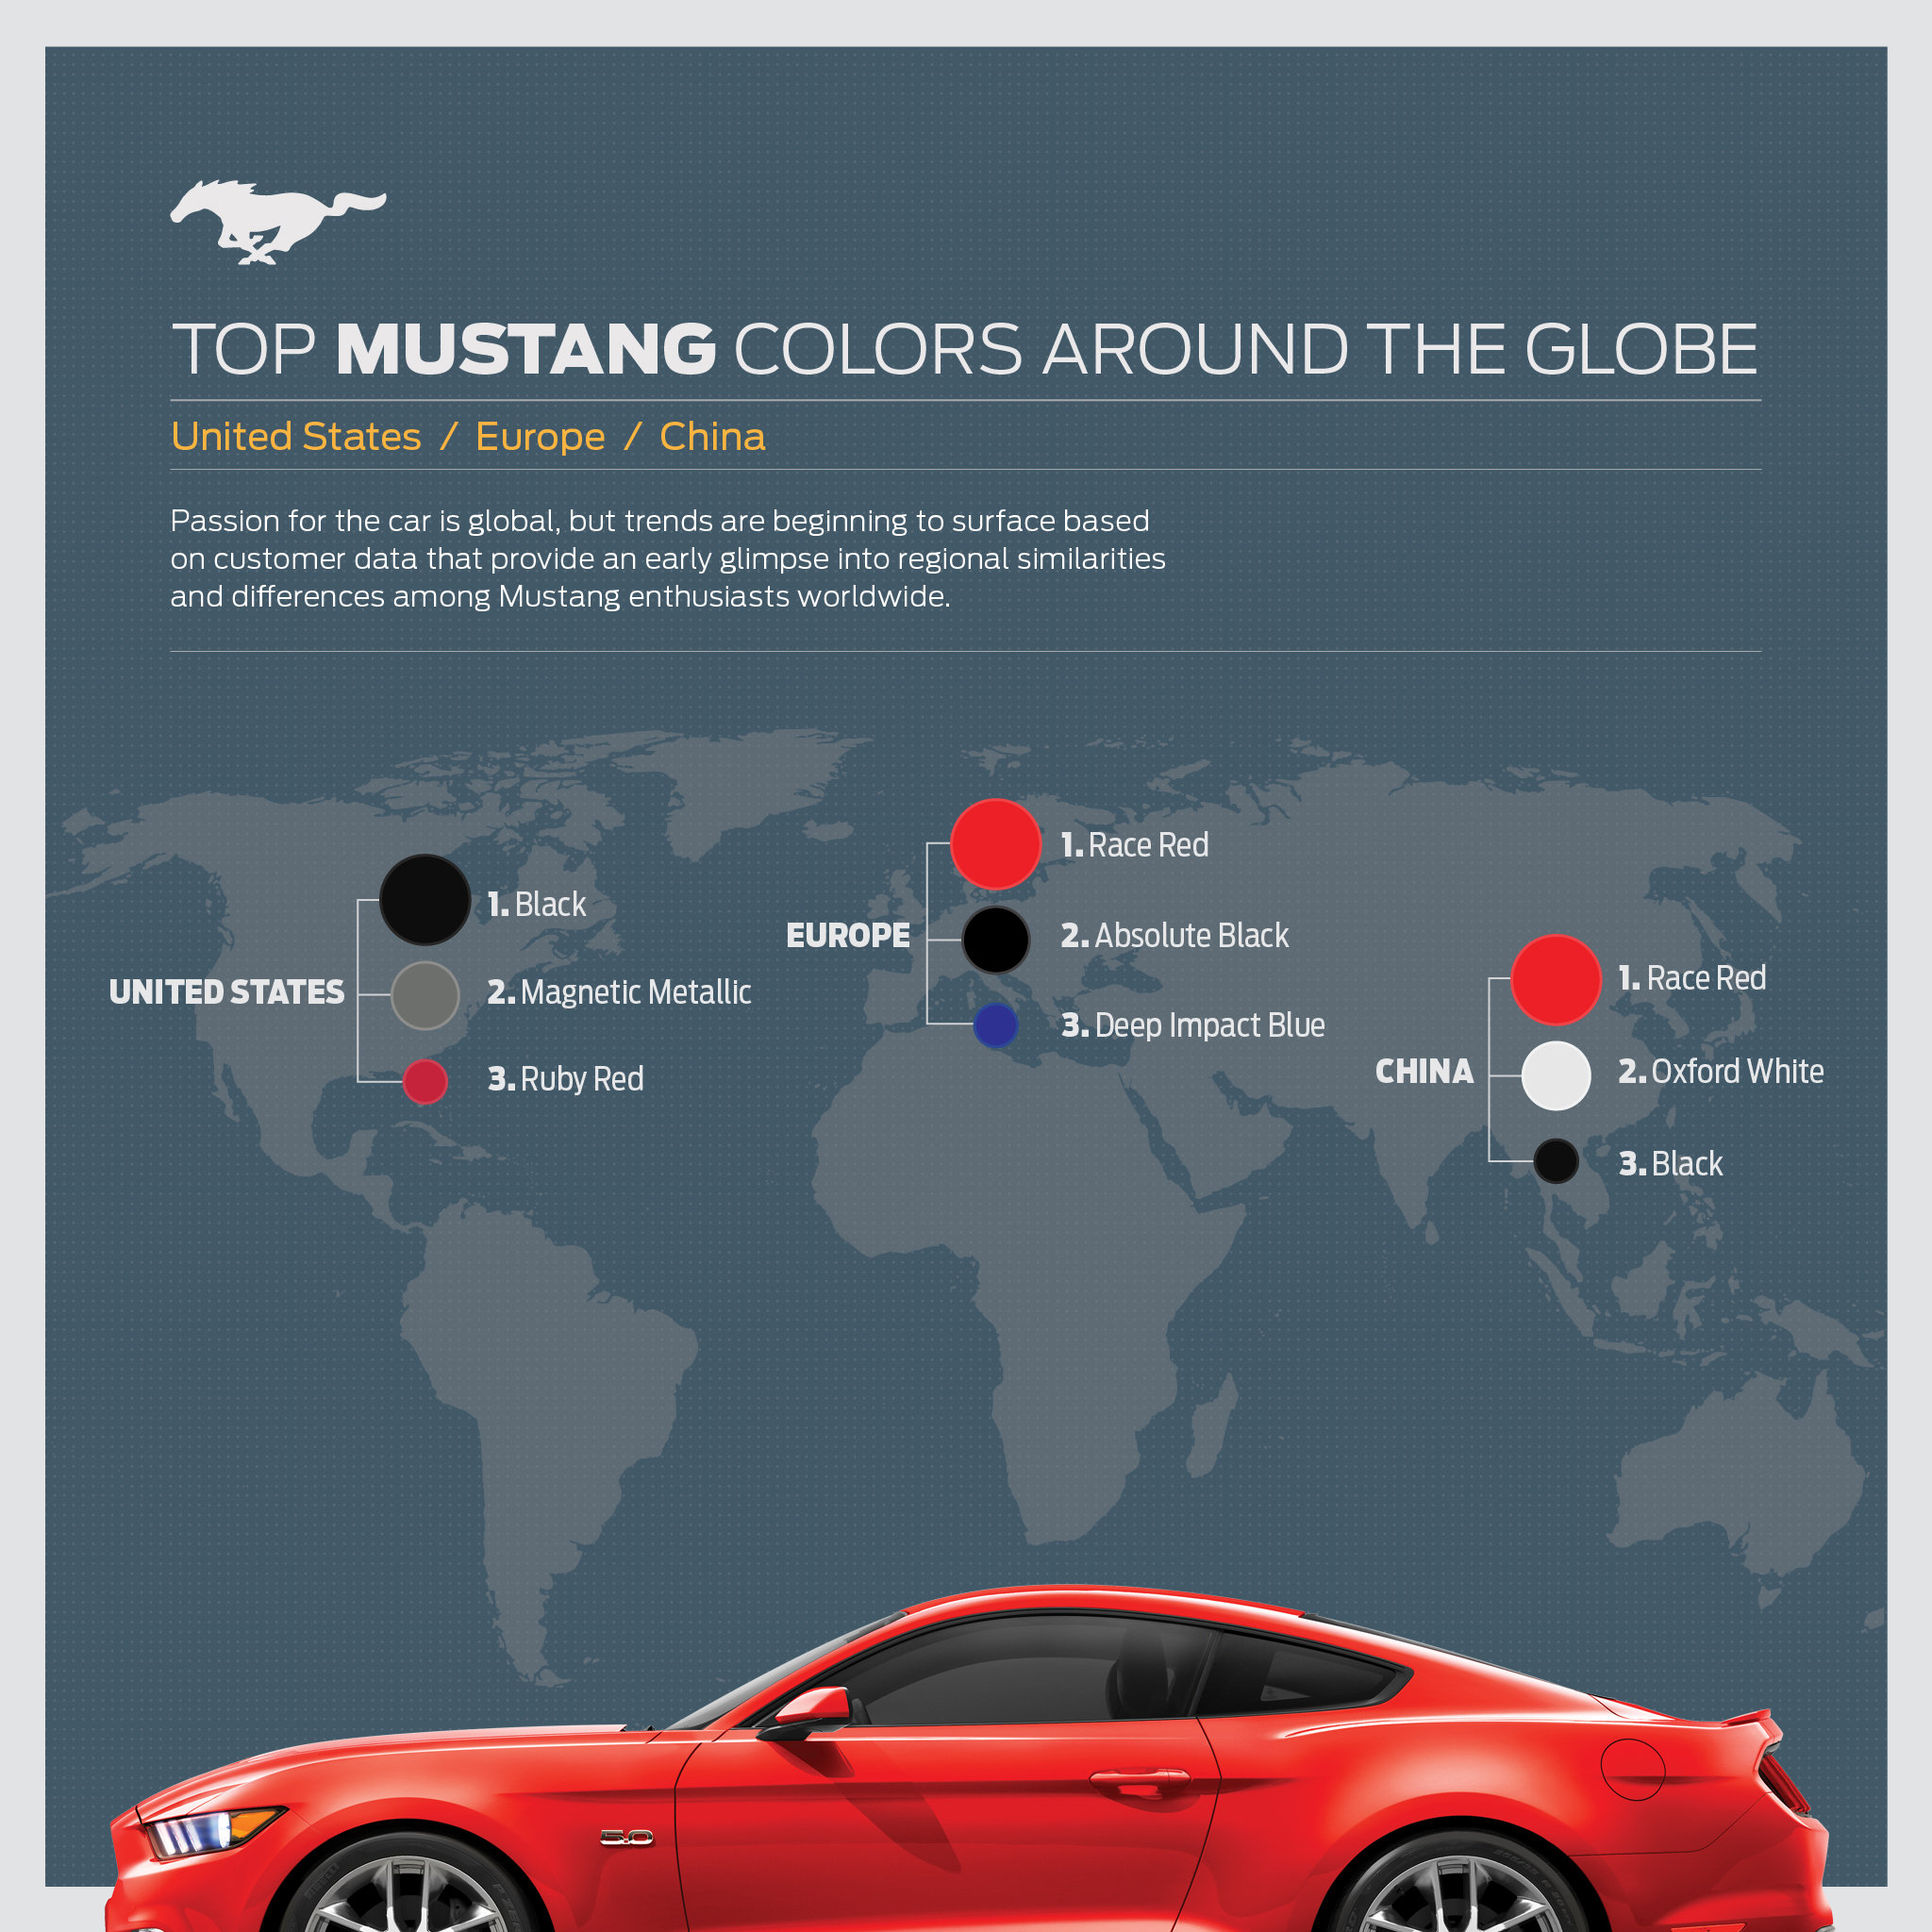 top-mustang-colors-around-the-globe-7af23f7e6c986a0b